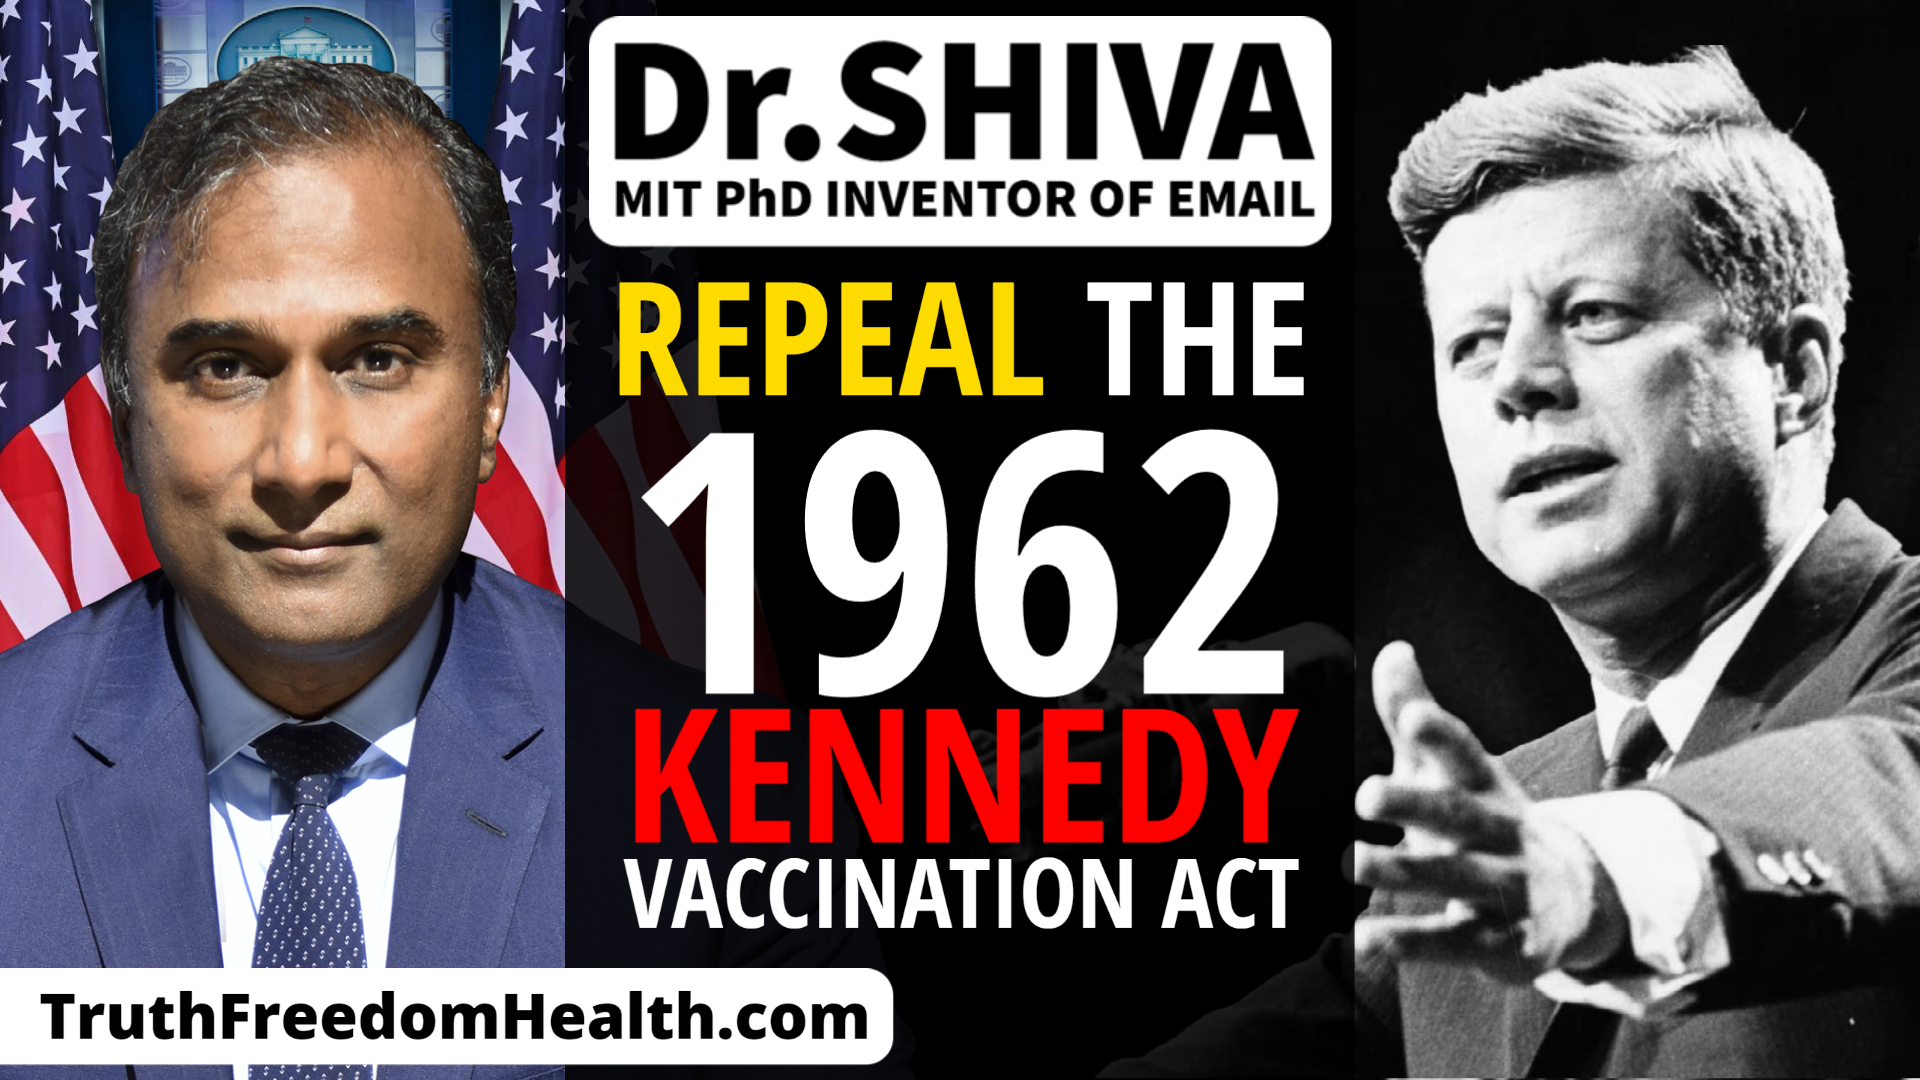 Dr.SHIVA™ TOWN HALL: Health Care - Repeal the 1962 KENNEDY Vaccination Act.